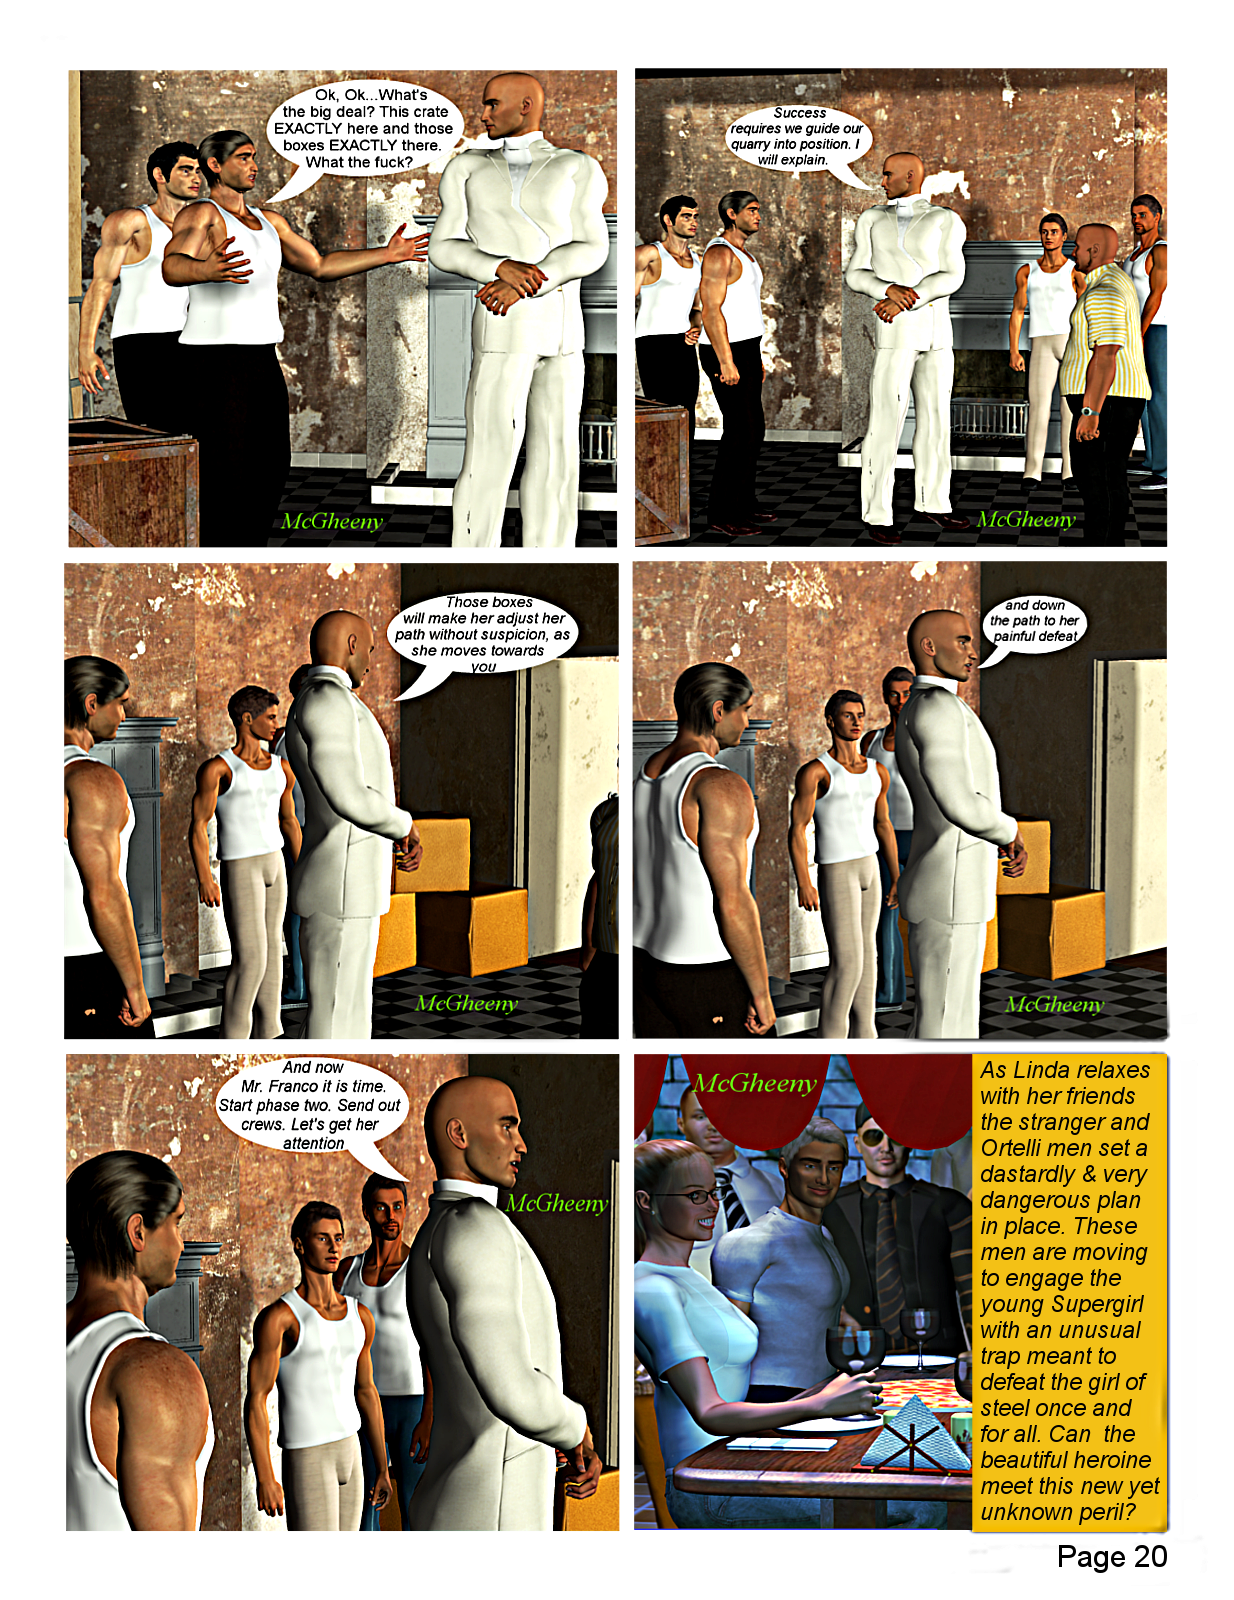 020 The Den of Pain Page 20.png